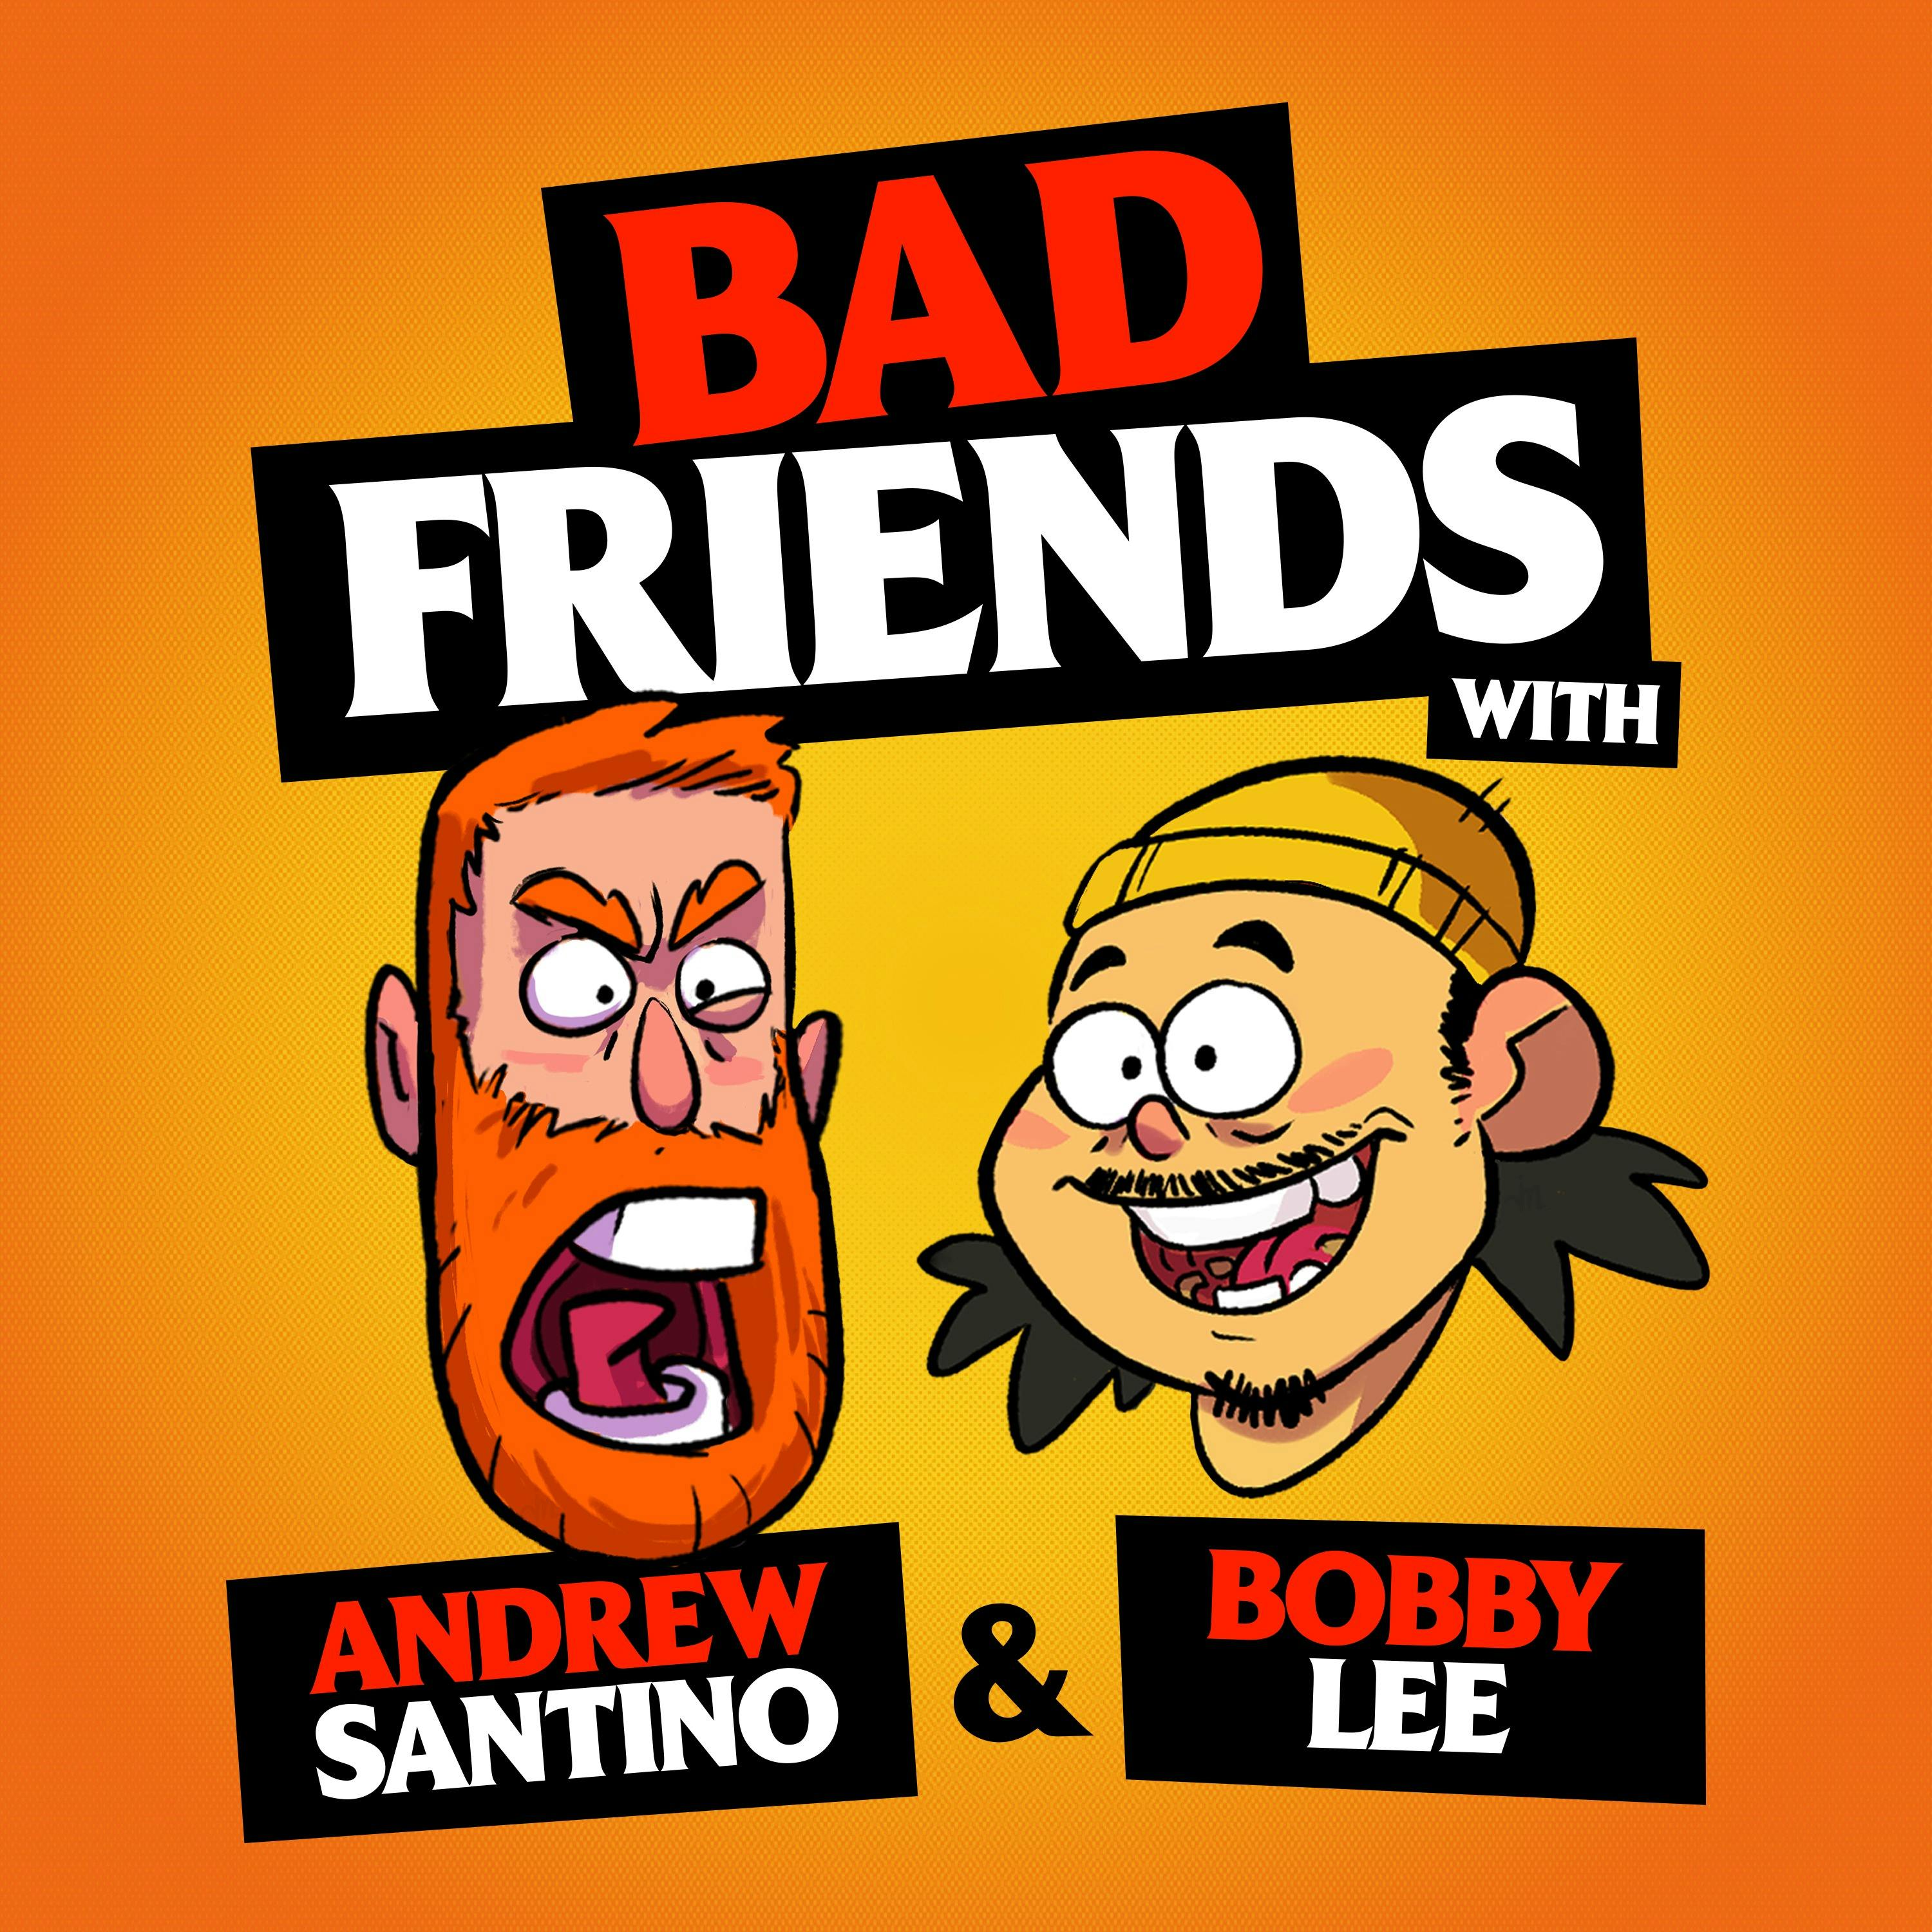 Bobby's Valentine's Ring by Andrew Santino and Bobby Lee